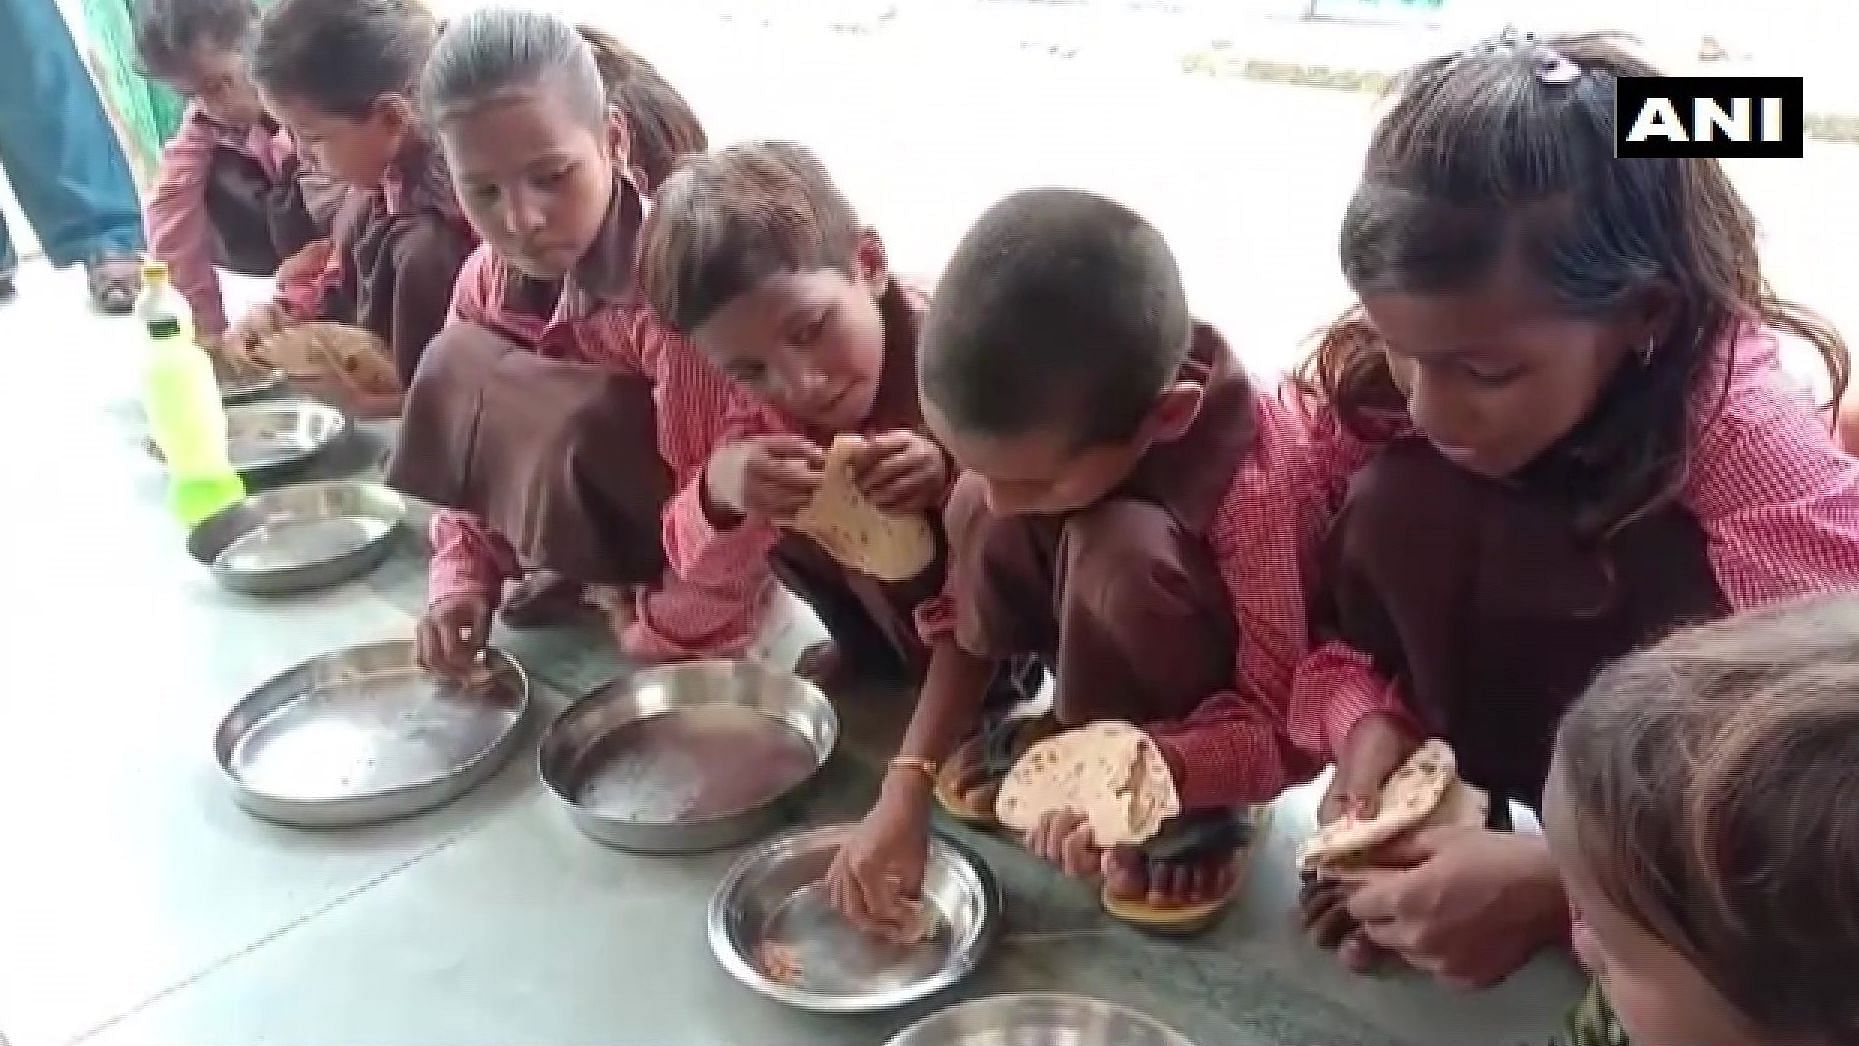 Primary school children in Mirzapur were served rotis and salt as their mid-day meal